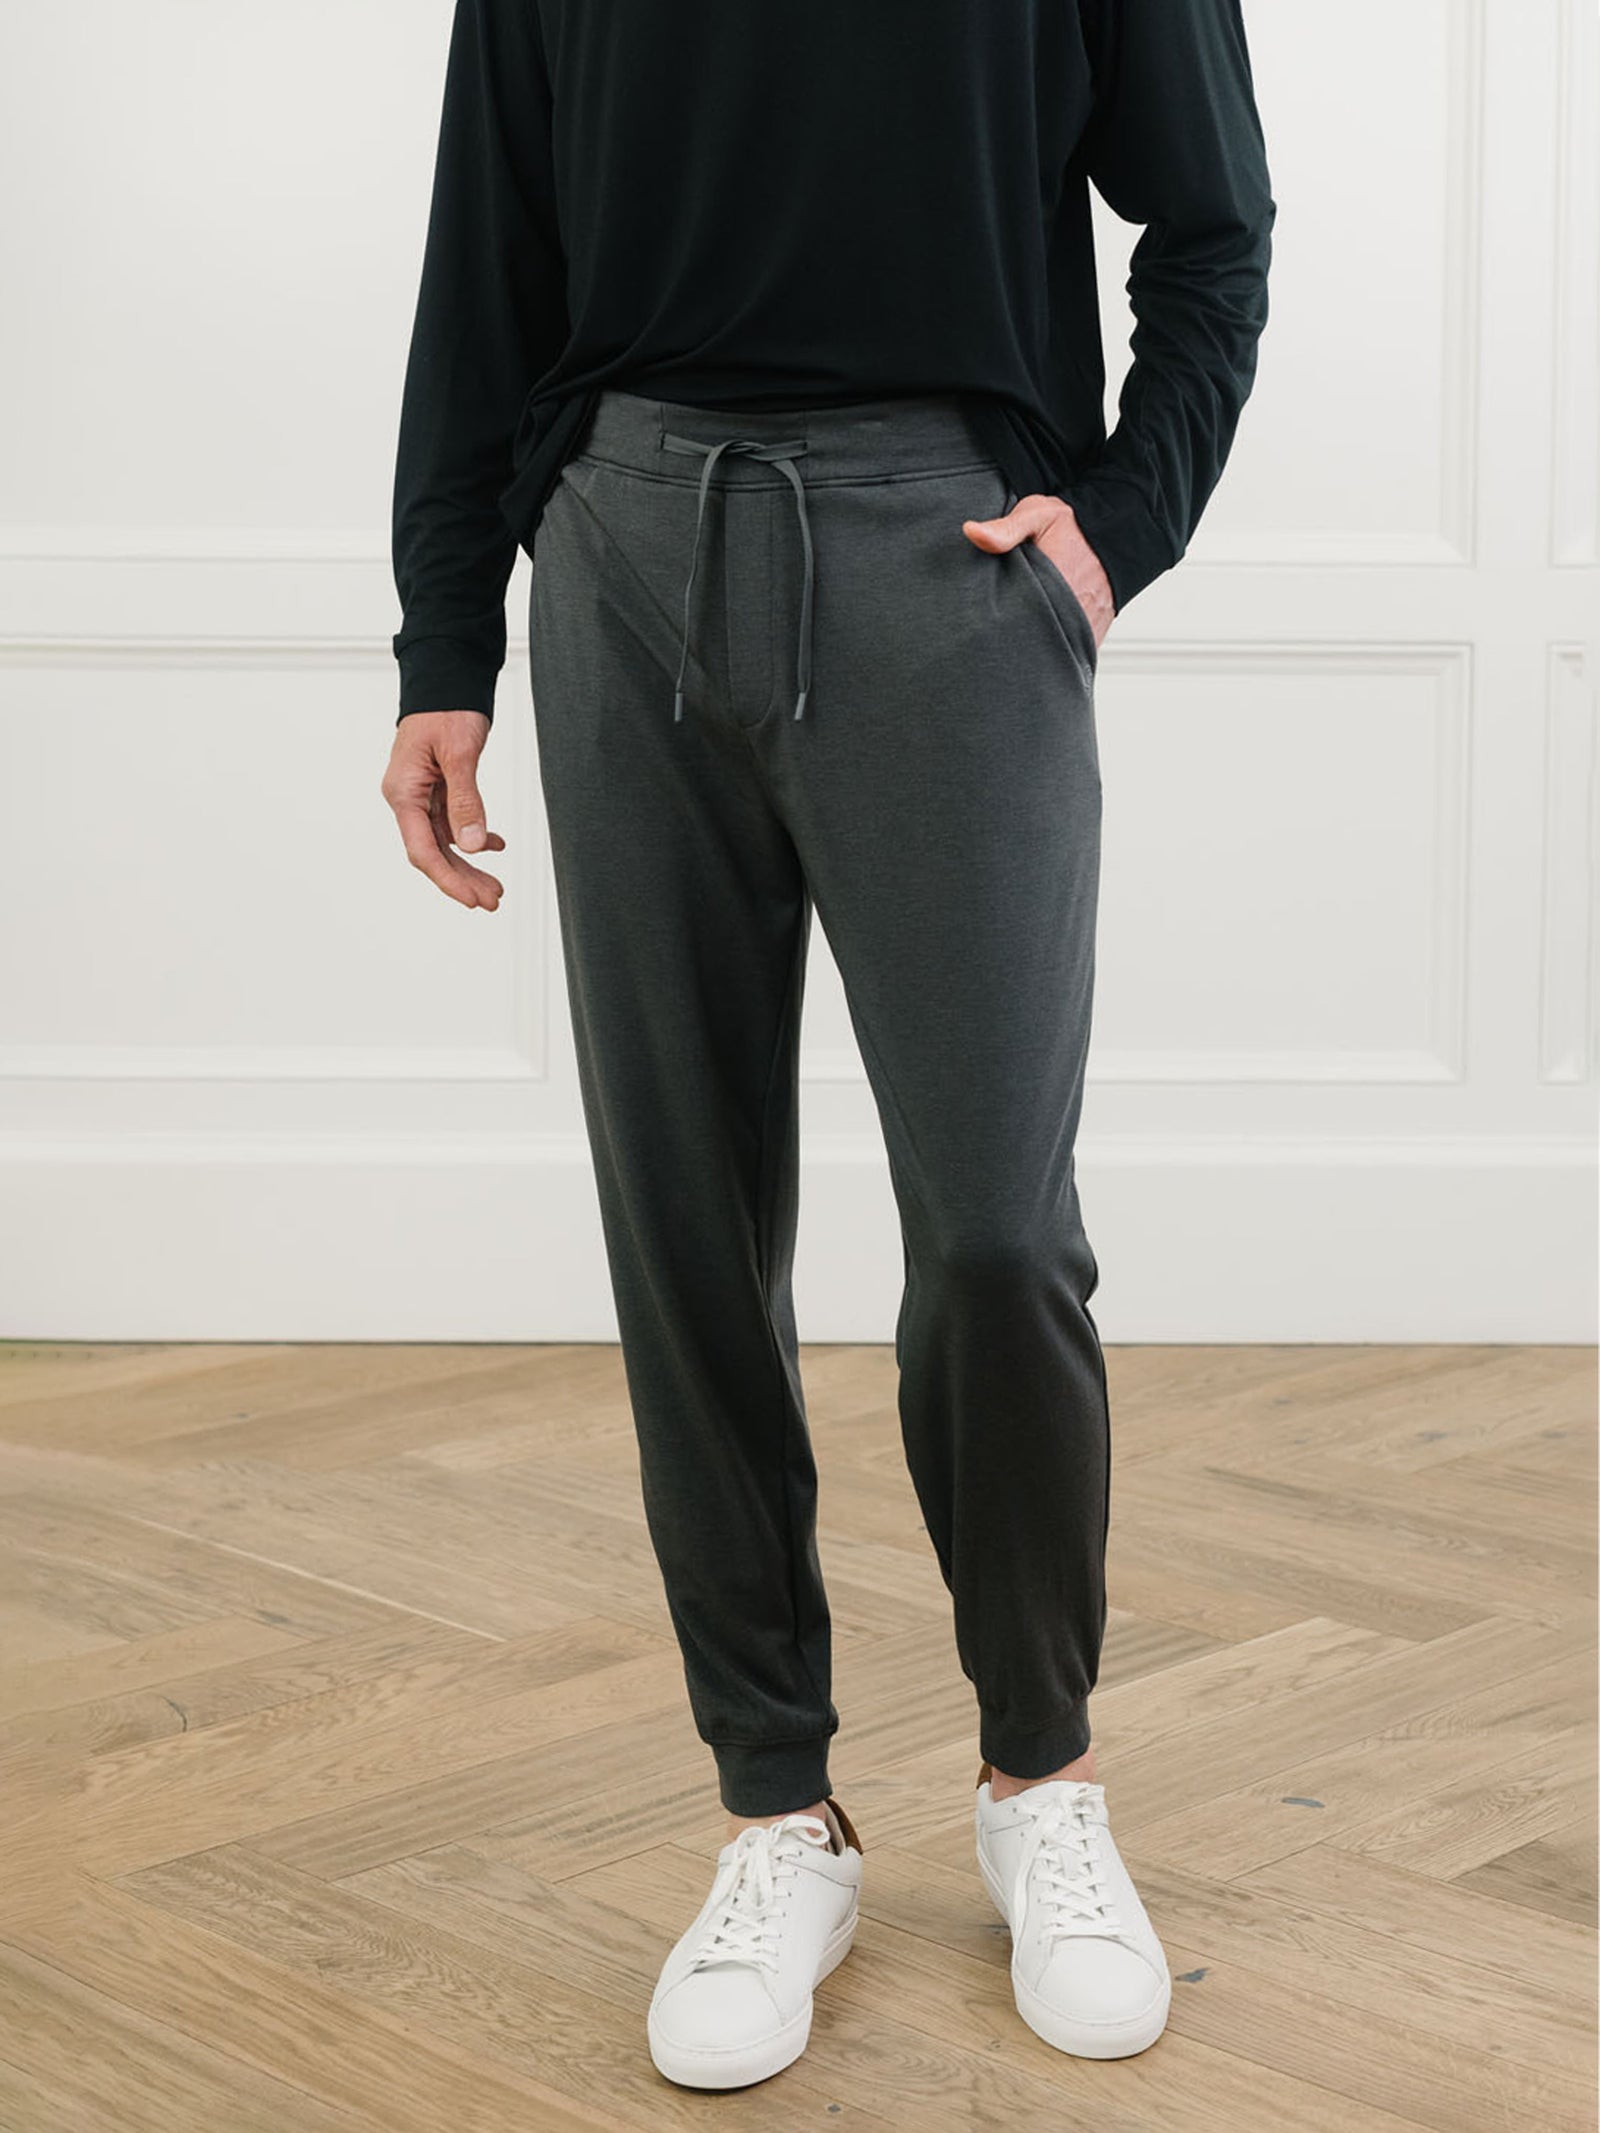 Charcoal/Black Men's Bamboo Jogger Set. There is a man wearing the jogger set. He is standing in a well lit room in a home. with his back to the camera.Color:Charcoal